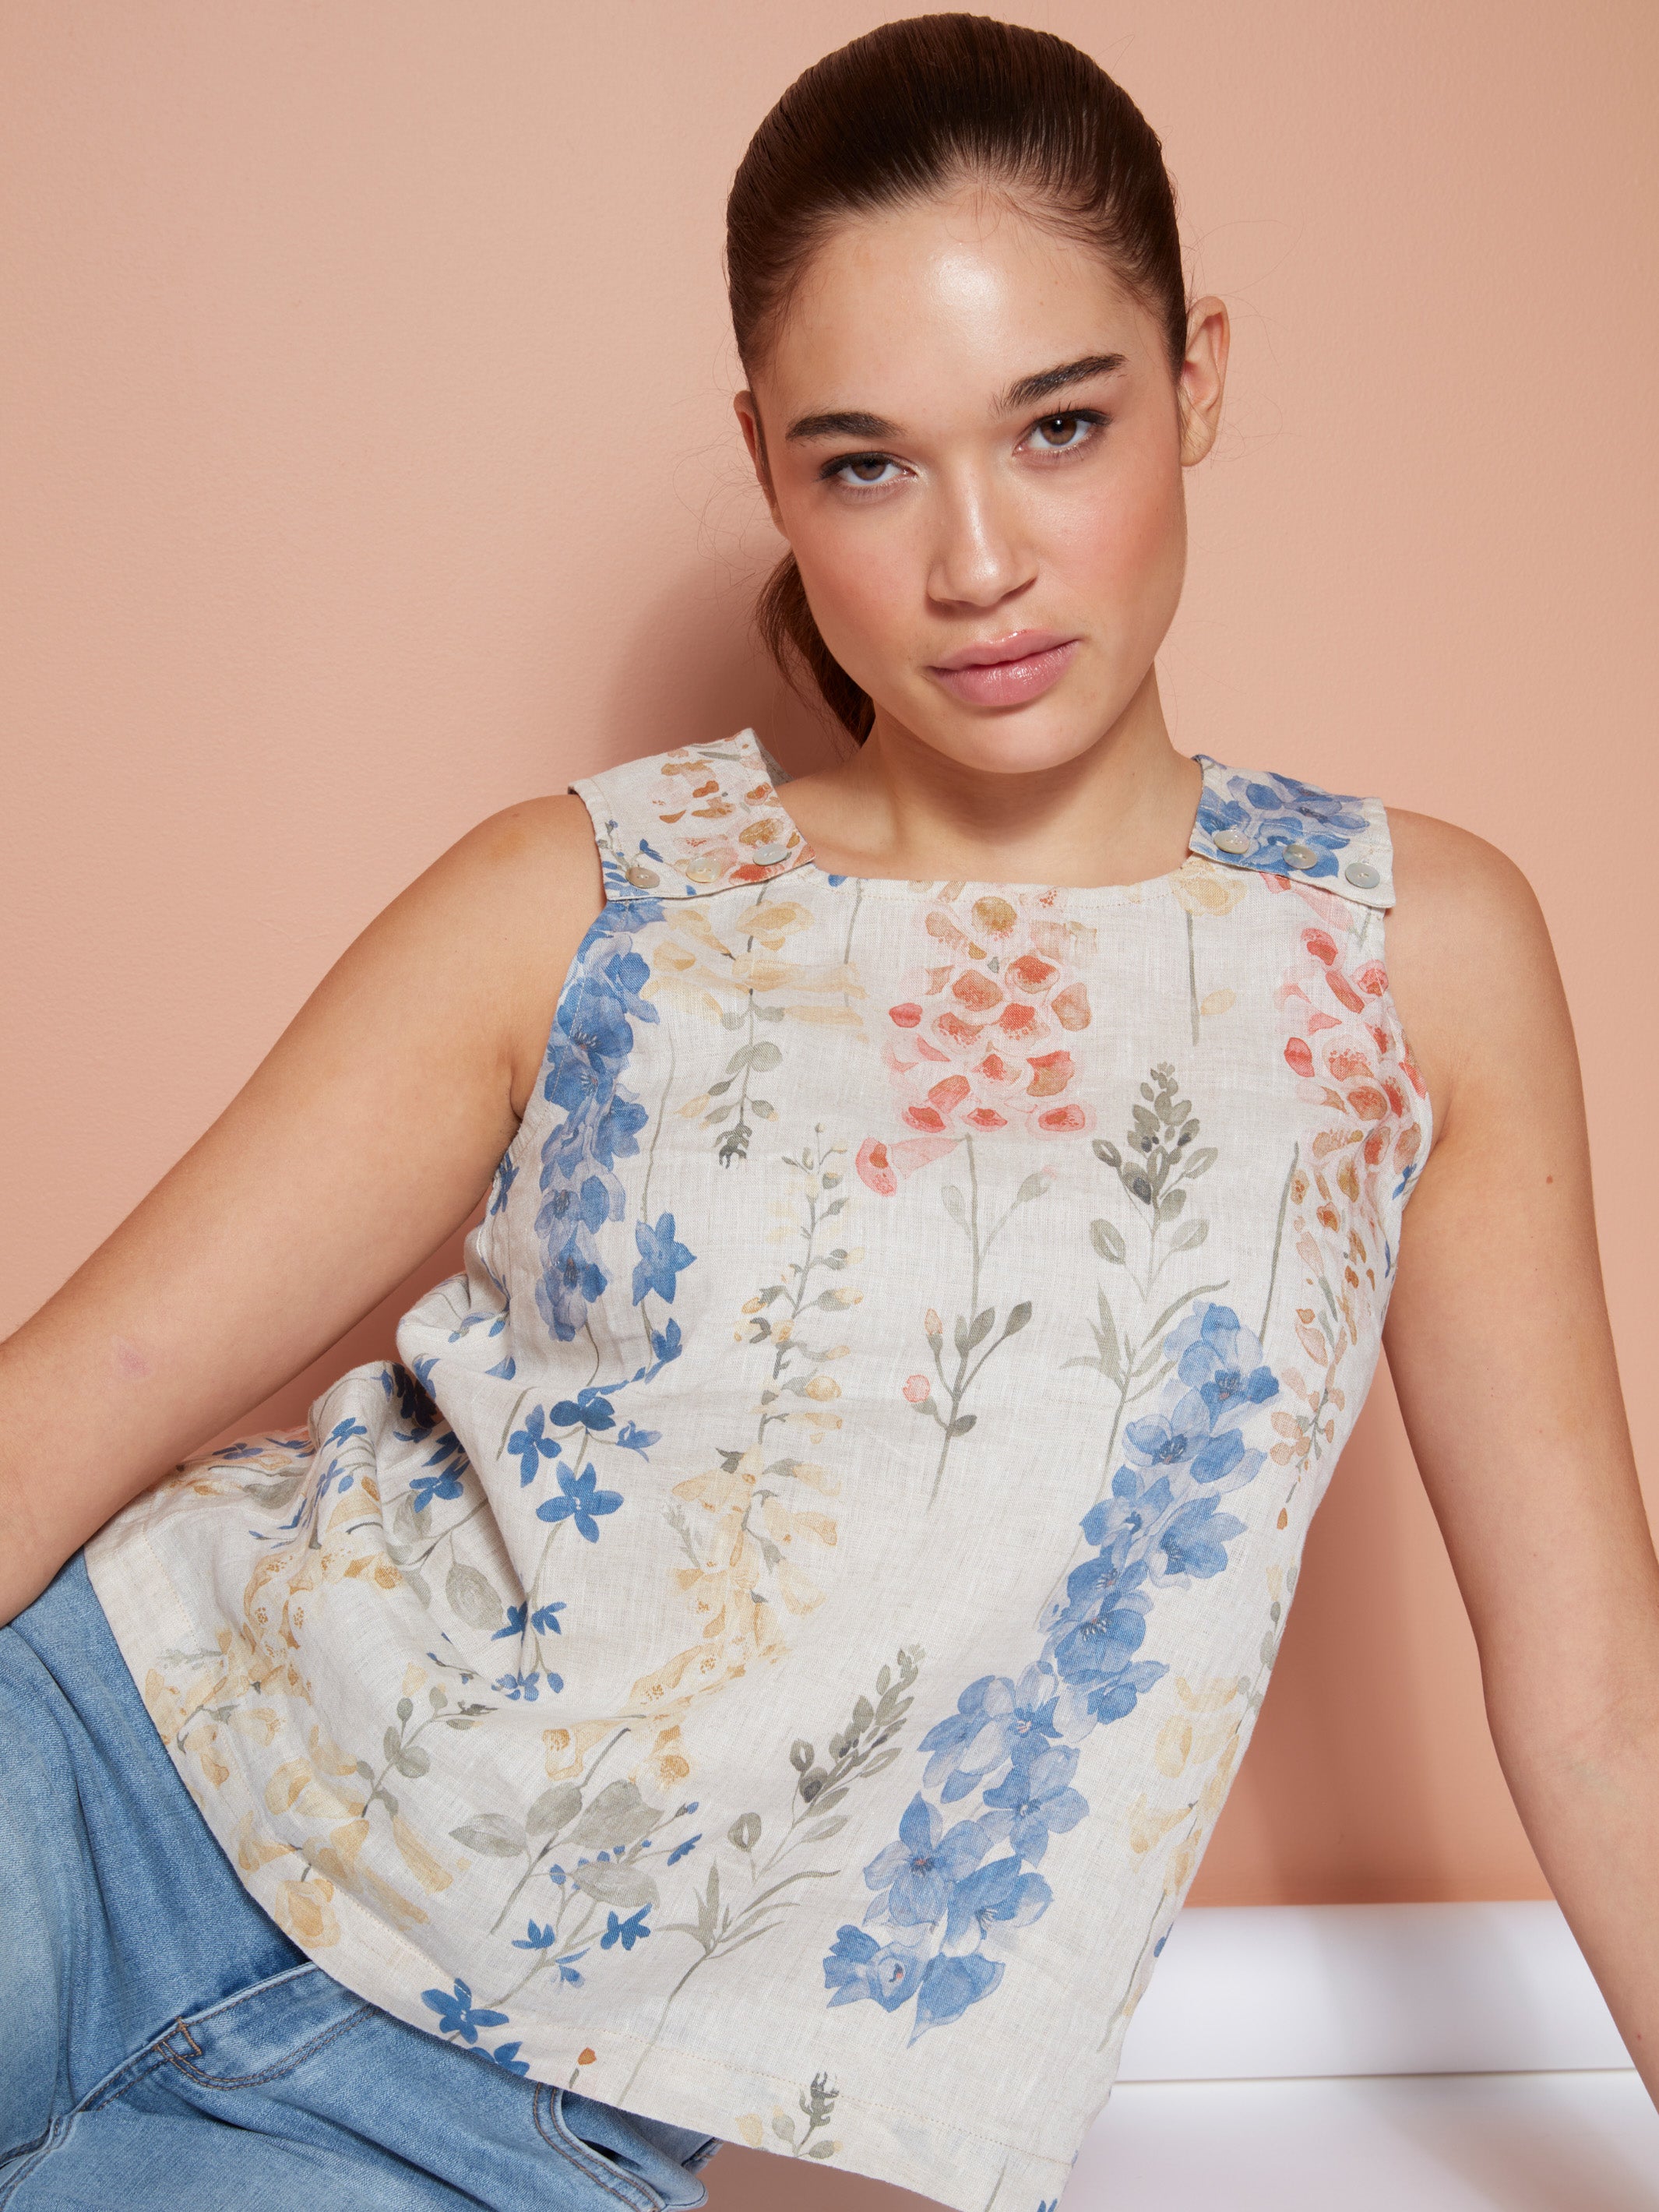 Charlie B Canada - Prints and Patterns Collection - Printed Women's Tops, Sweaters, Dresses & more